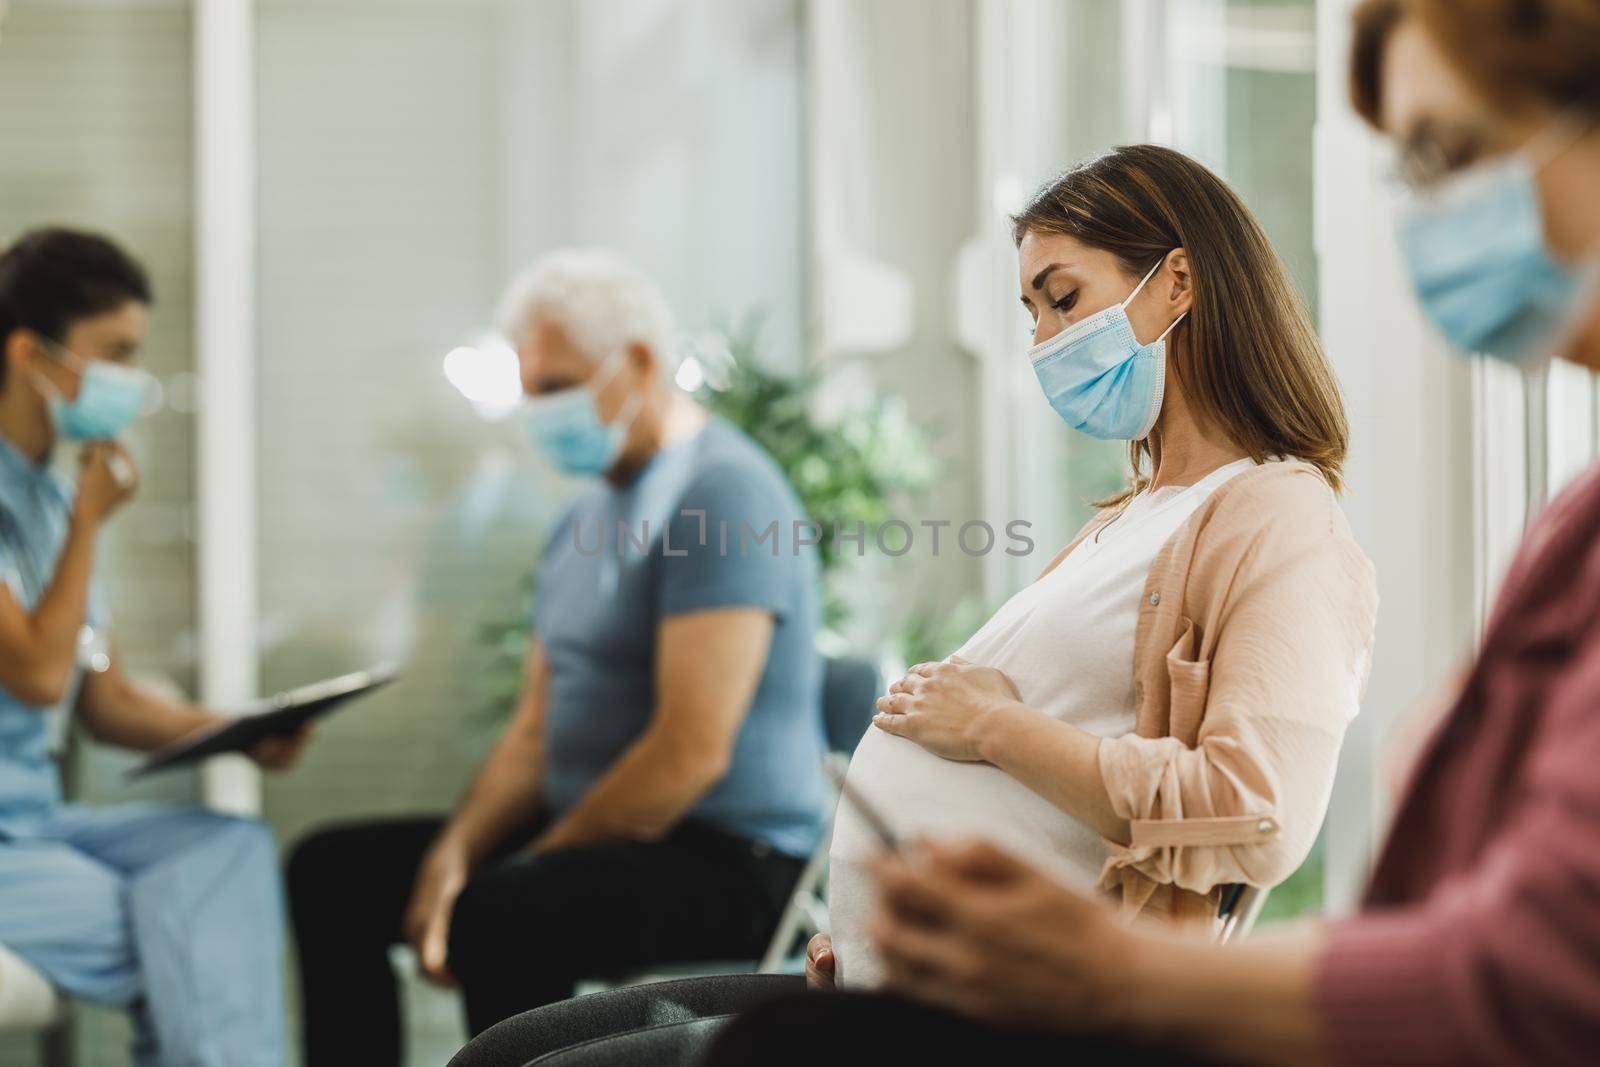 Young pregnant woman with a face mask sitting in a waiting room and waiting medical exam during corona virus pandemic.